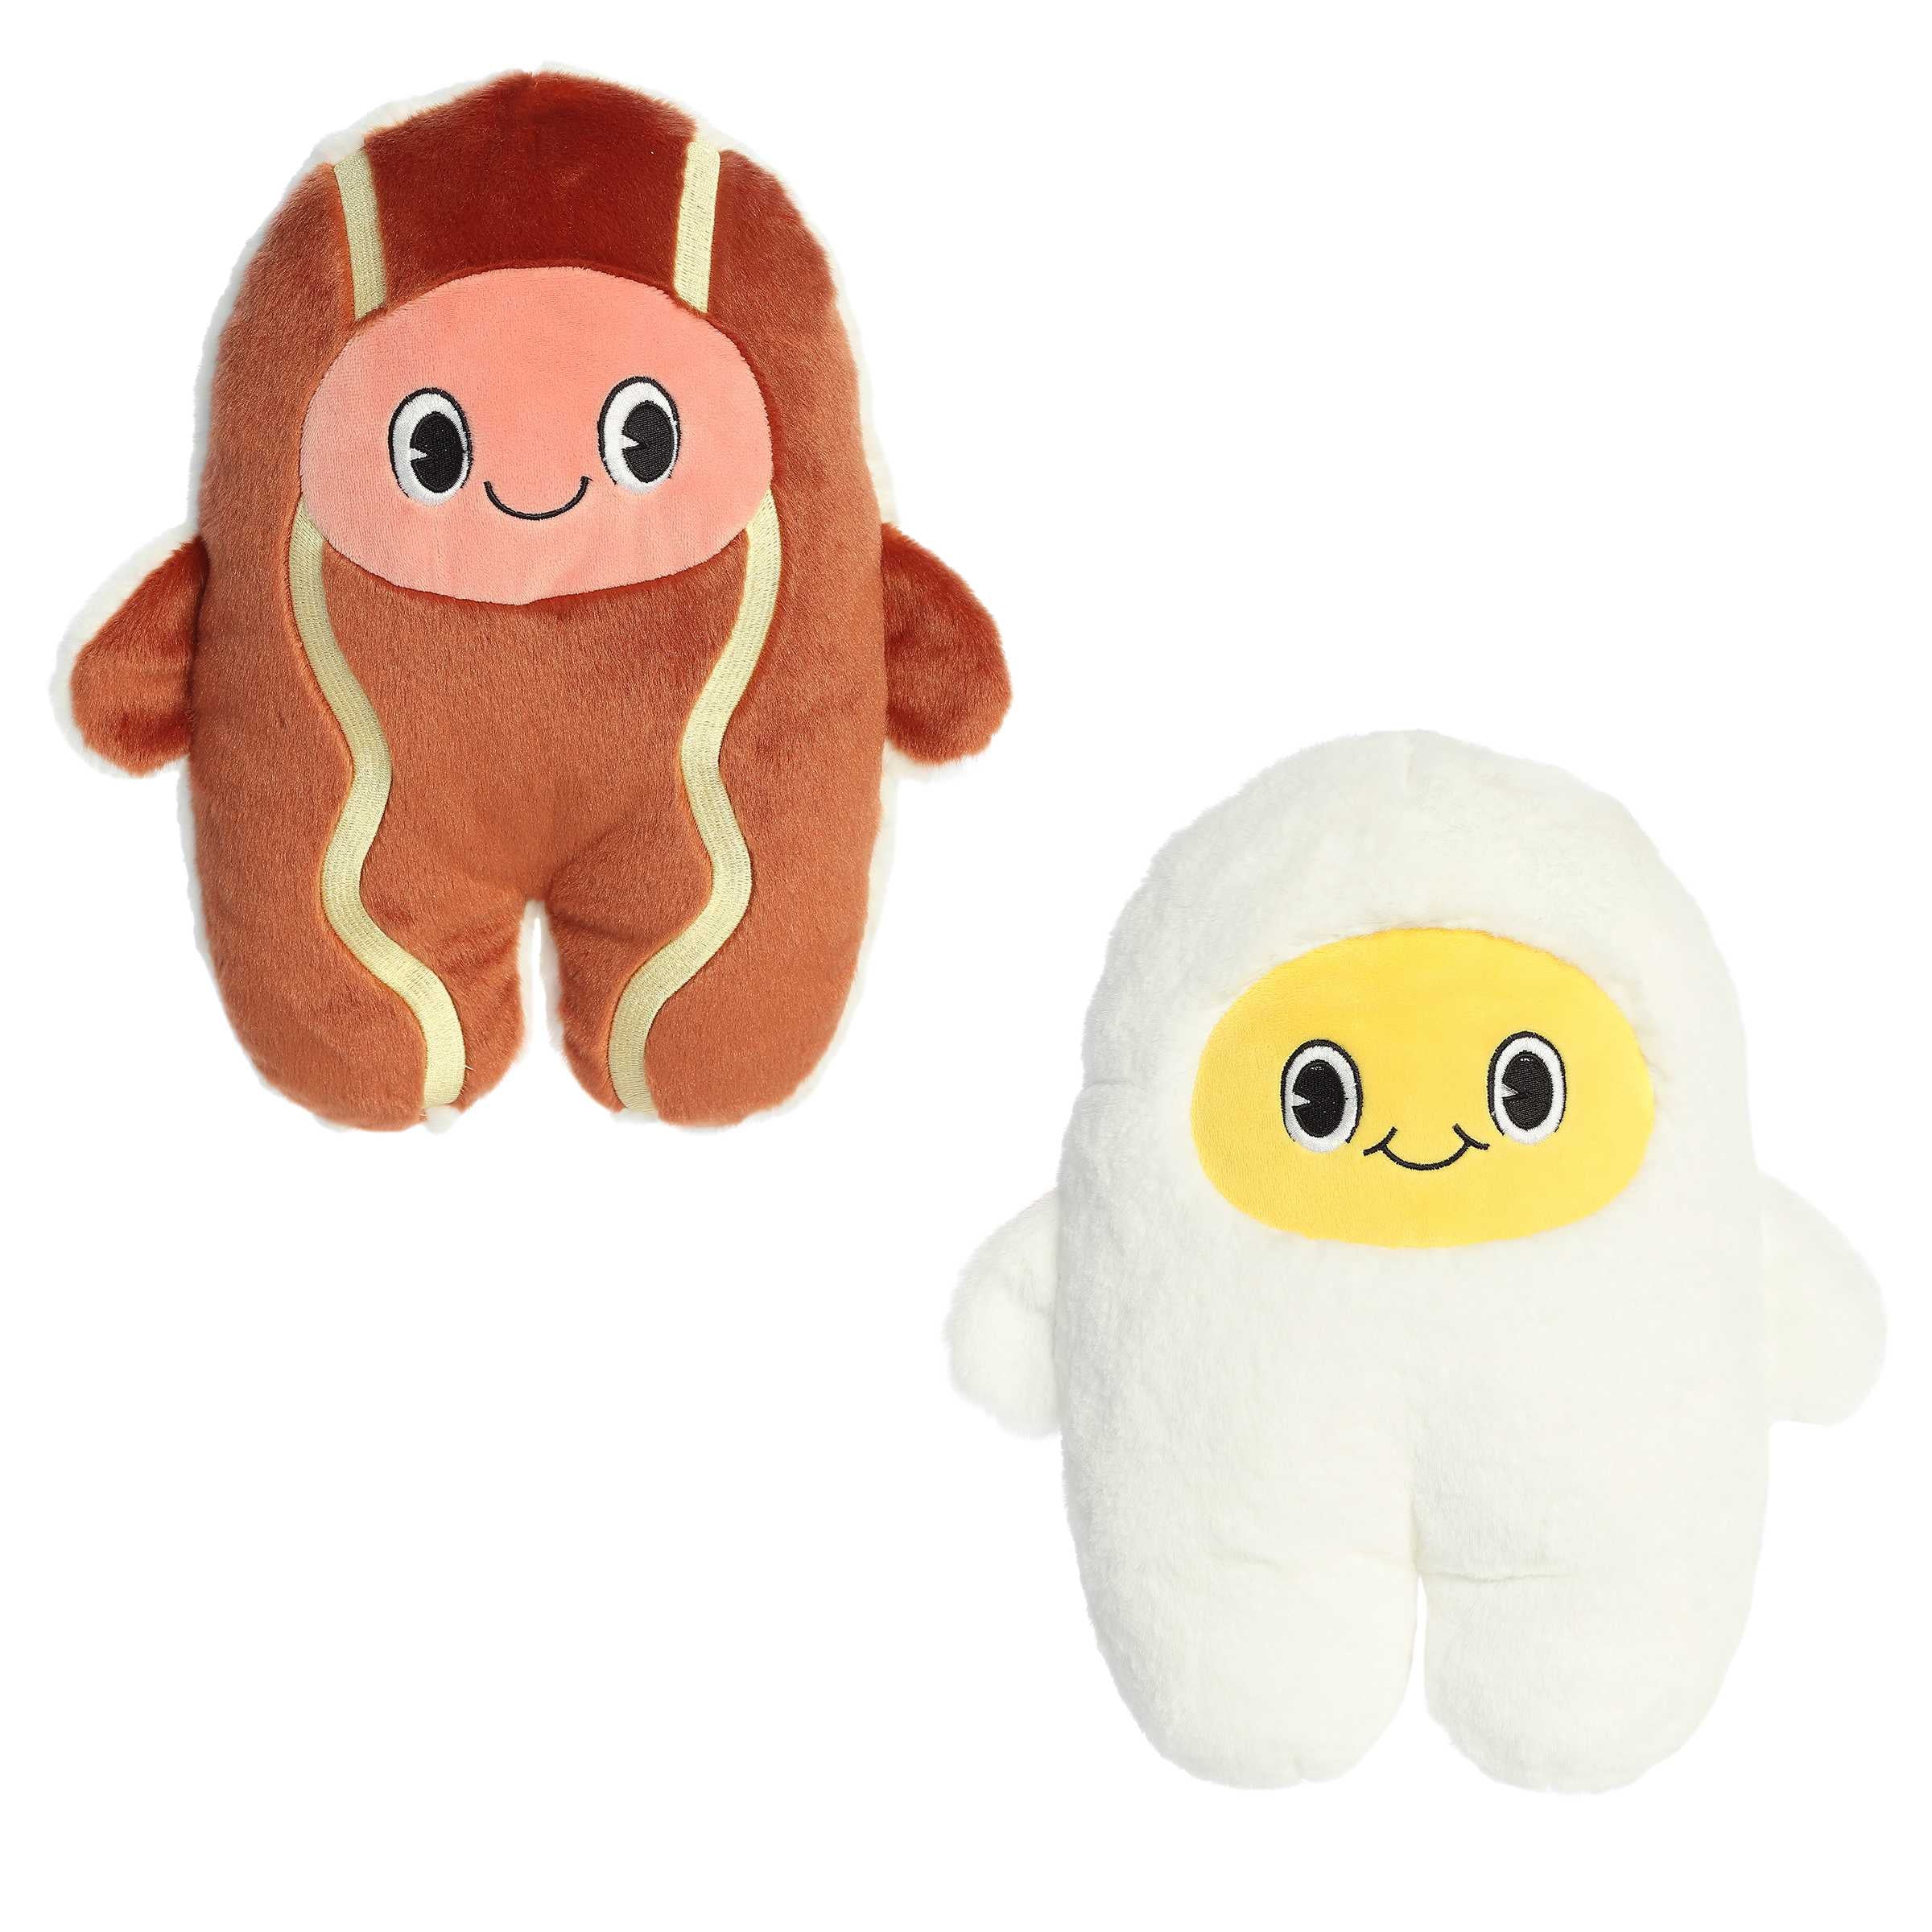 Breakfast-themed Bacon & Eggs FlipOvers plush, flipping between bacon and eggs, great for cuddly fun.